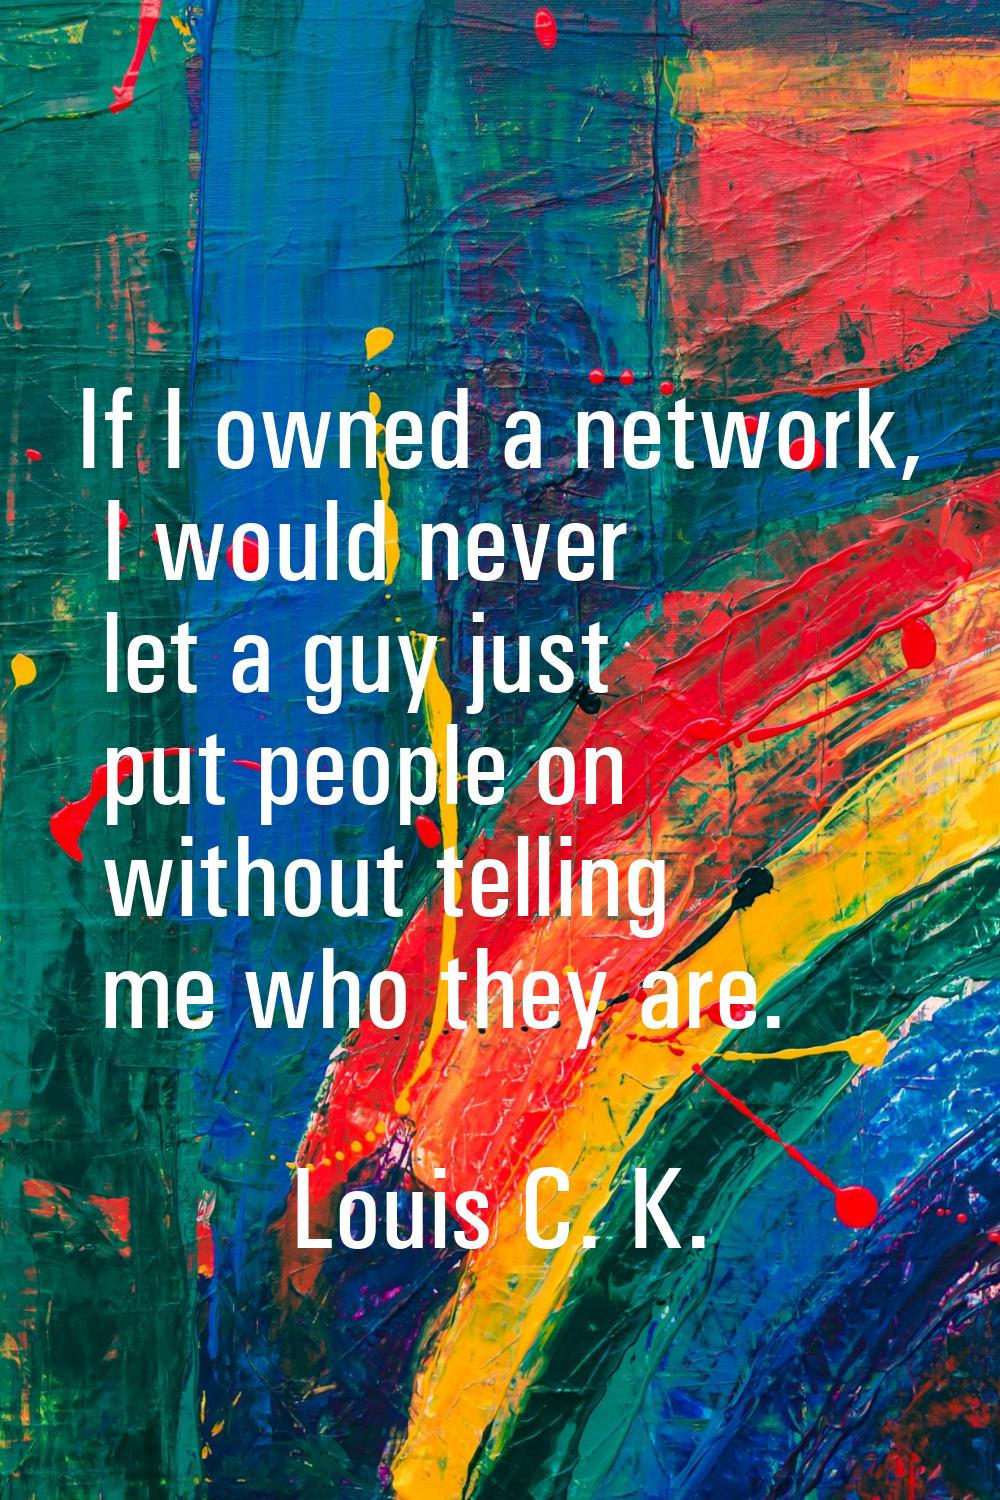 If I owned a network, I would never let a guy just put people on without telling me who they are.